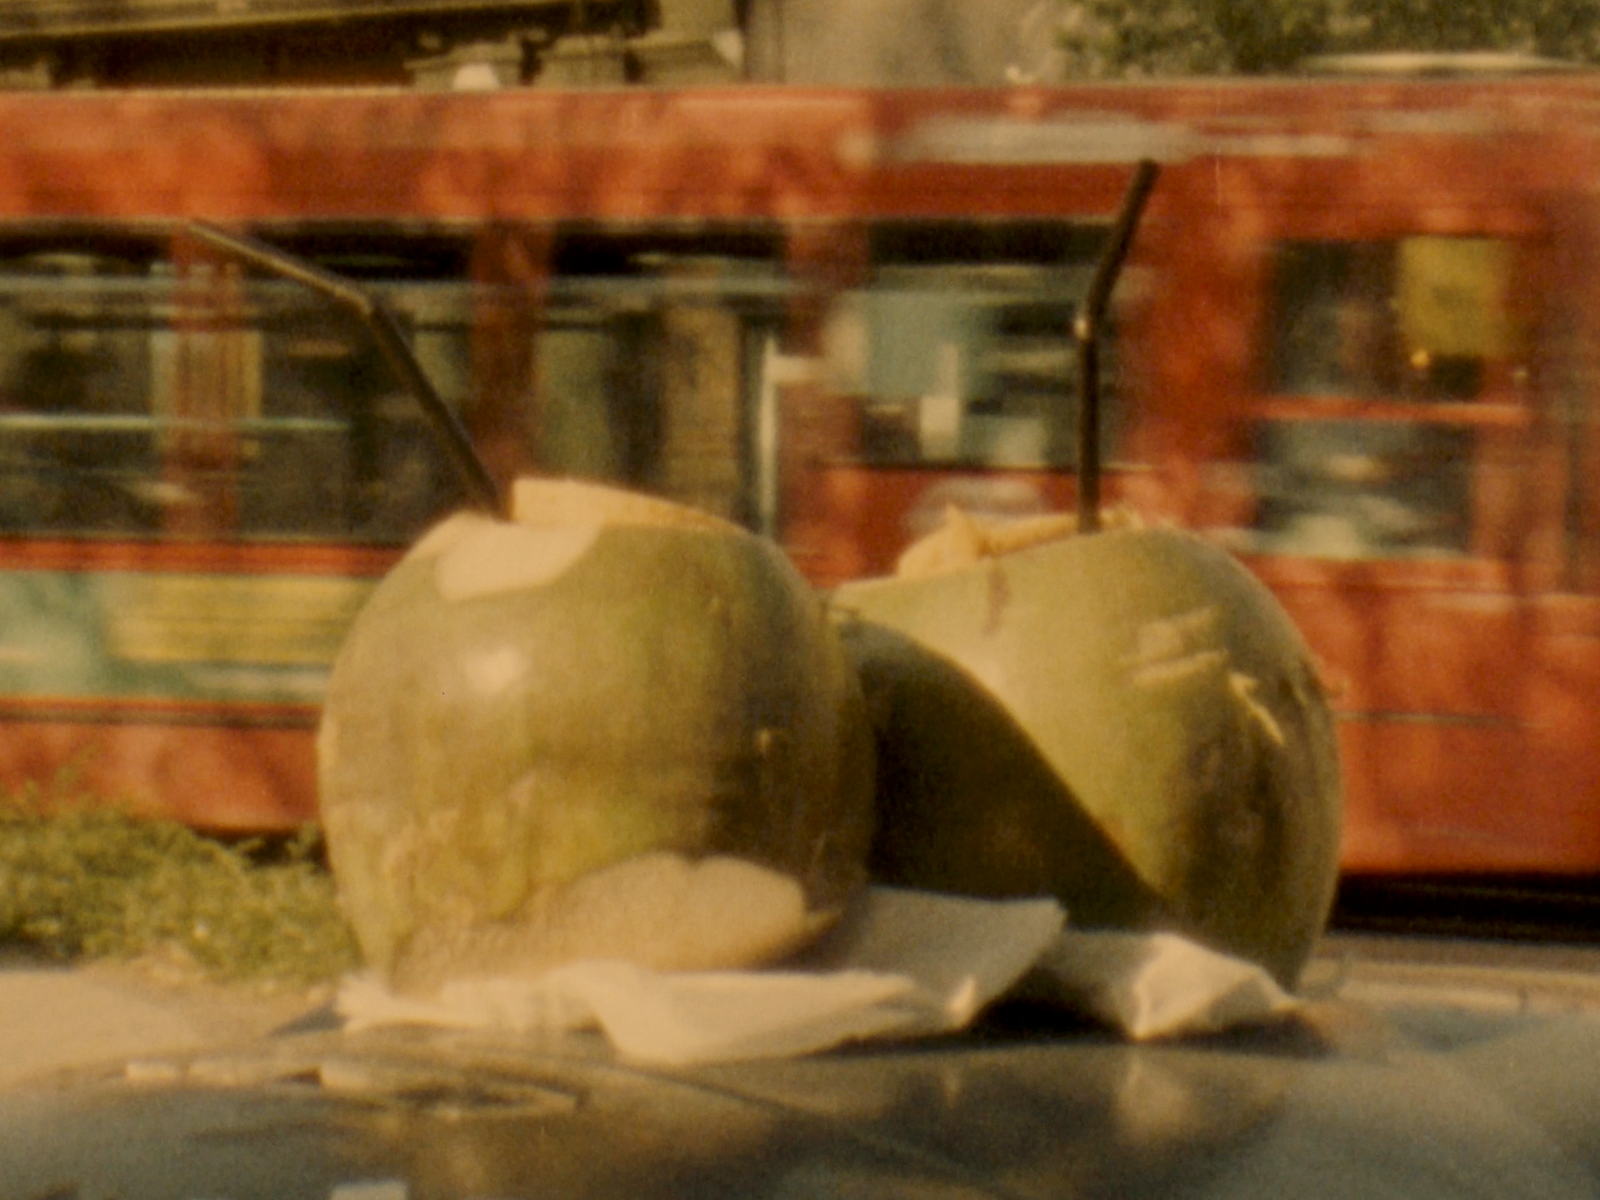 Still of two coconuts with straws on top of a bin with a bus going by in the background shot on super 8